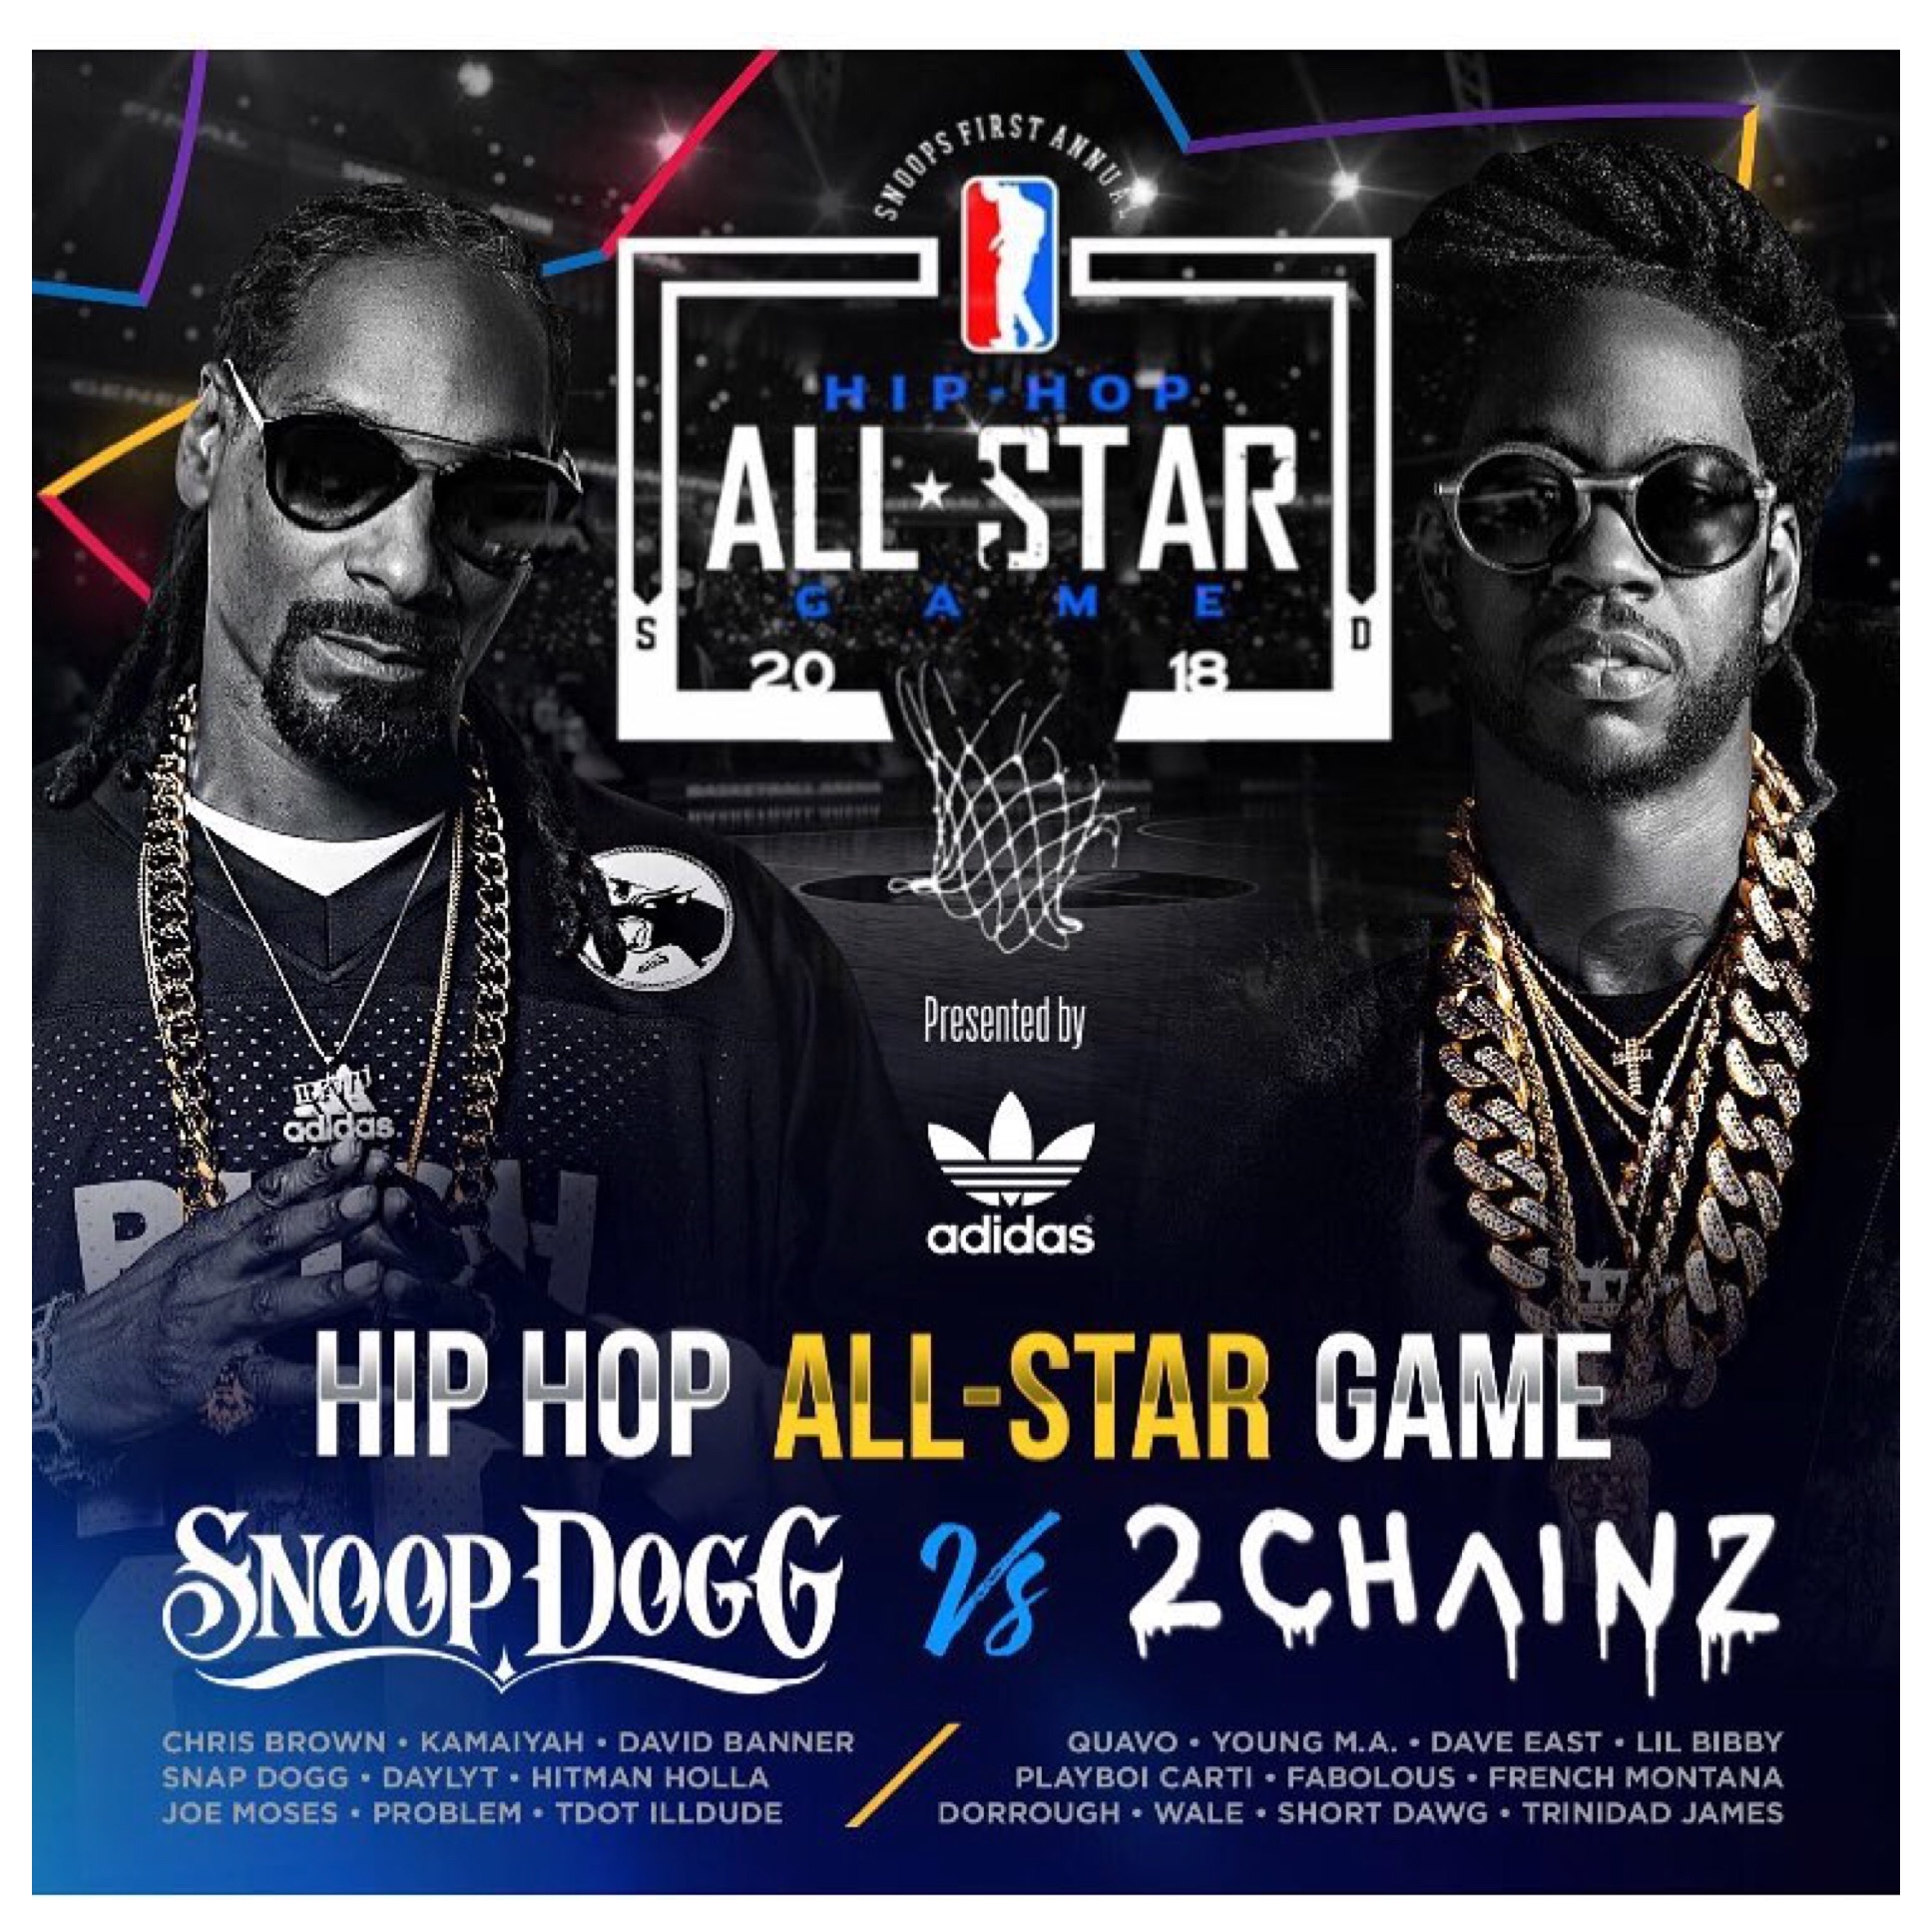 Snoop Dogg And 2 Chainz Get Set For Their Annual Adidas Celeb Basketball Tournament.